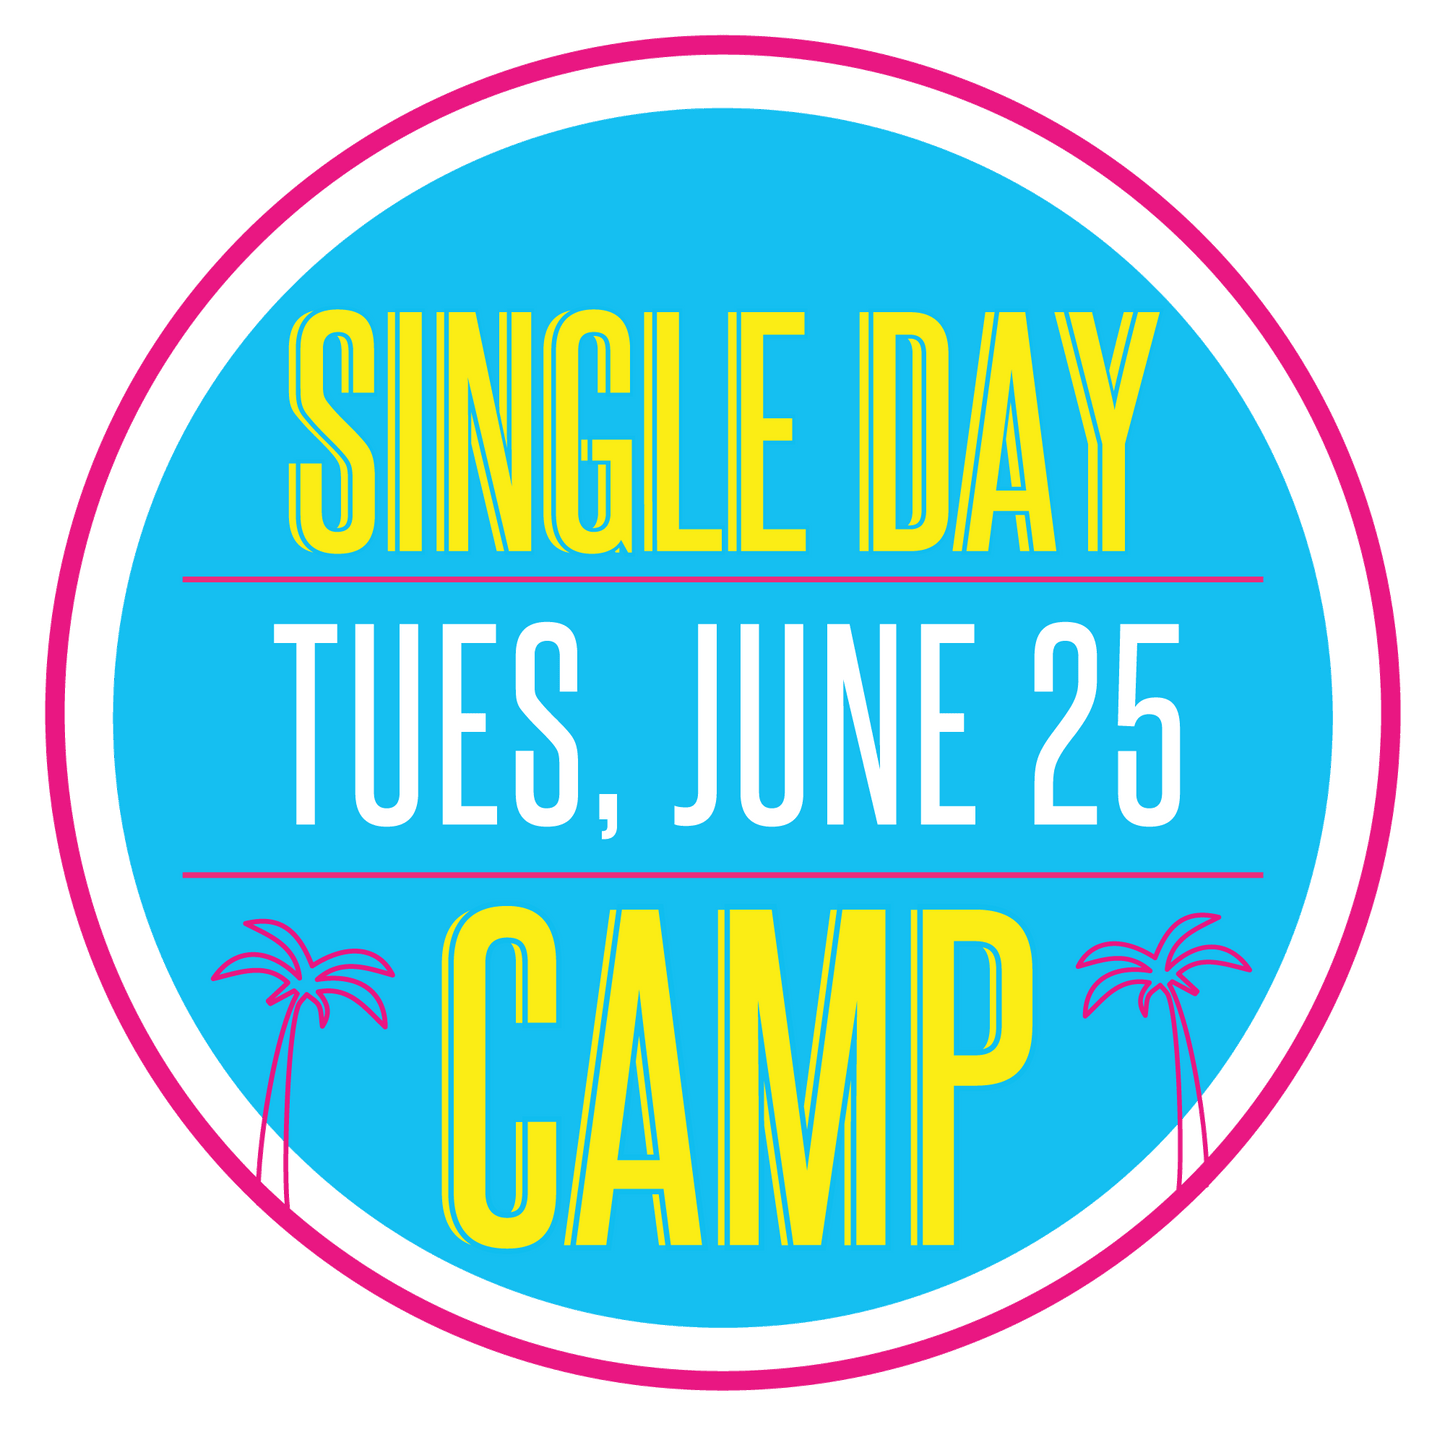 Single Day Sewing Workshop: Tuesday, June 25, 9am-3pm